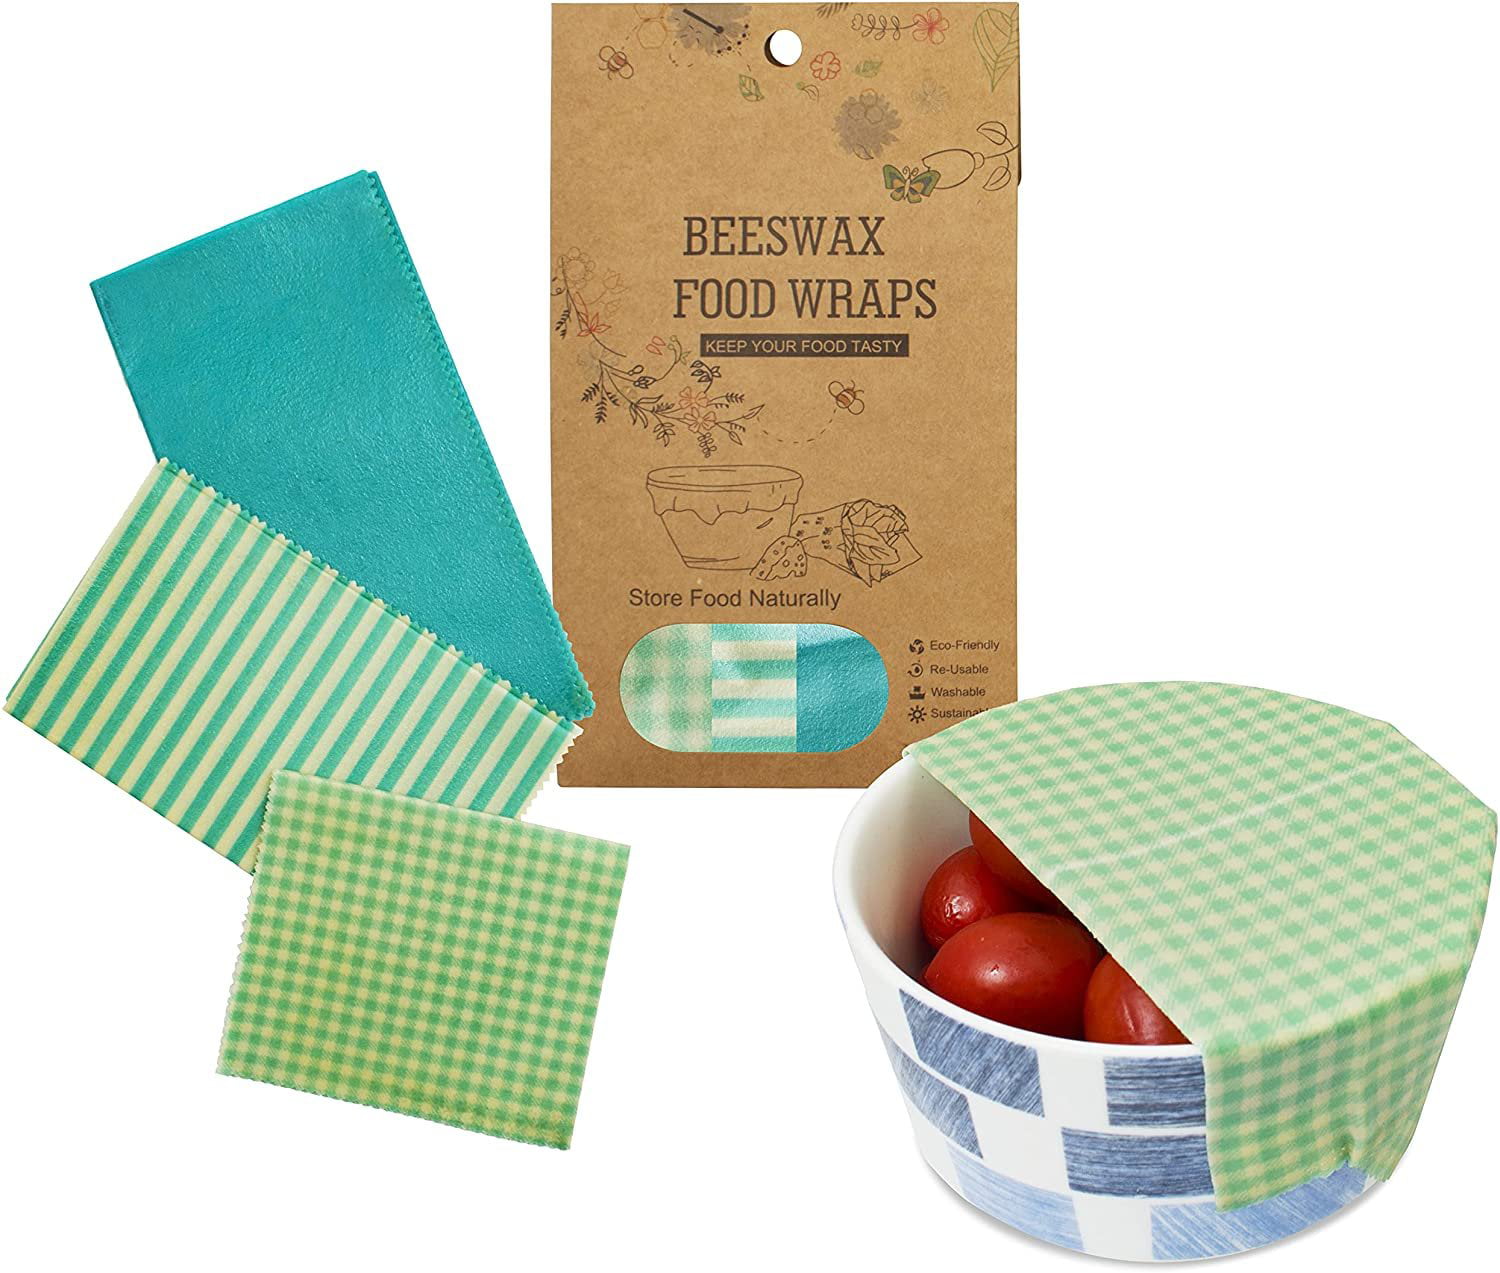 3Pcs Reusable Food Wraps Natural Beeswax (3 Sizes) by Ecologie